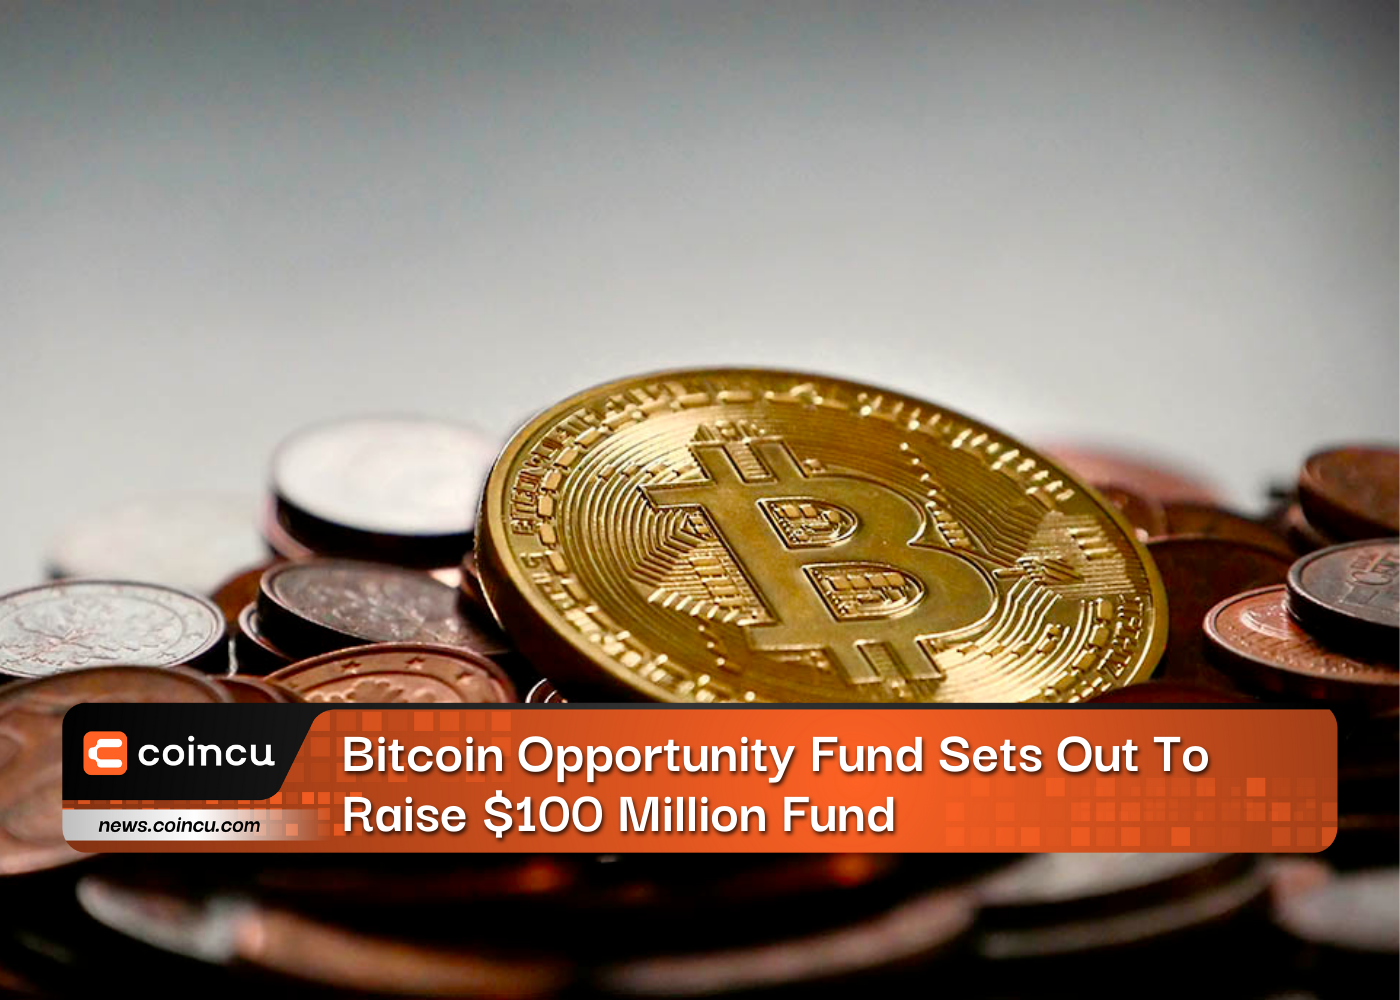 Bitcoin Opportunity Fund Sets Out To Raise $100 Million Fund